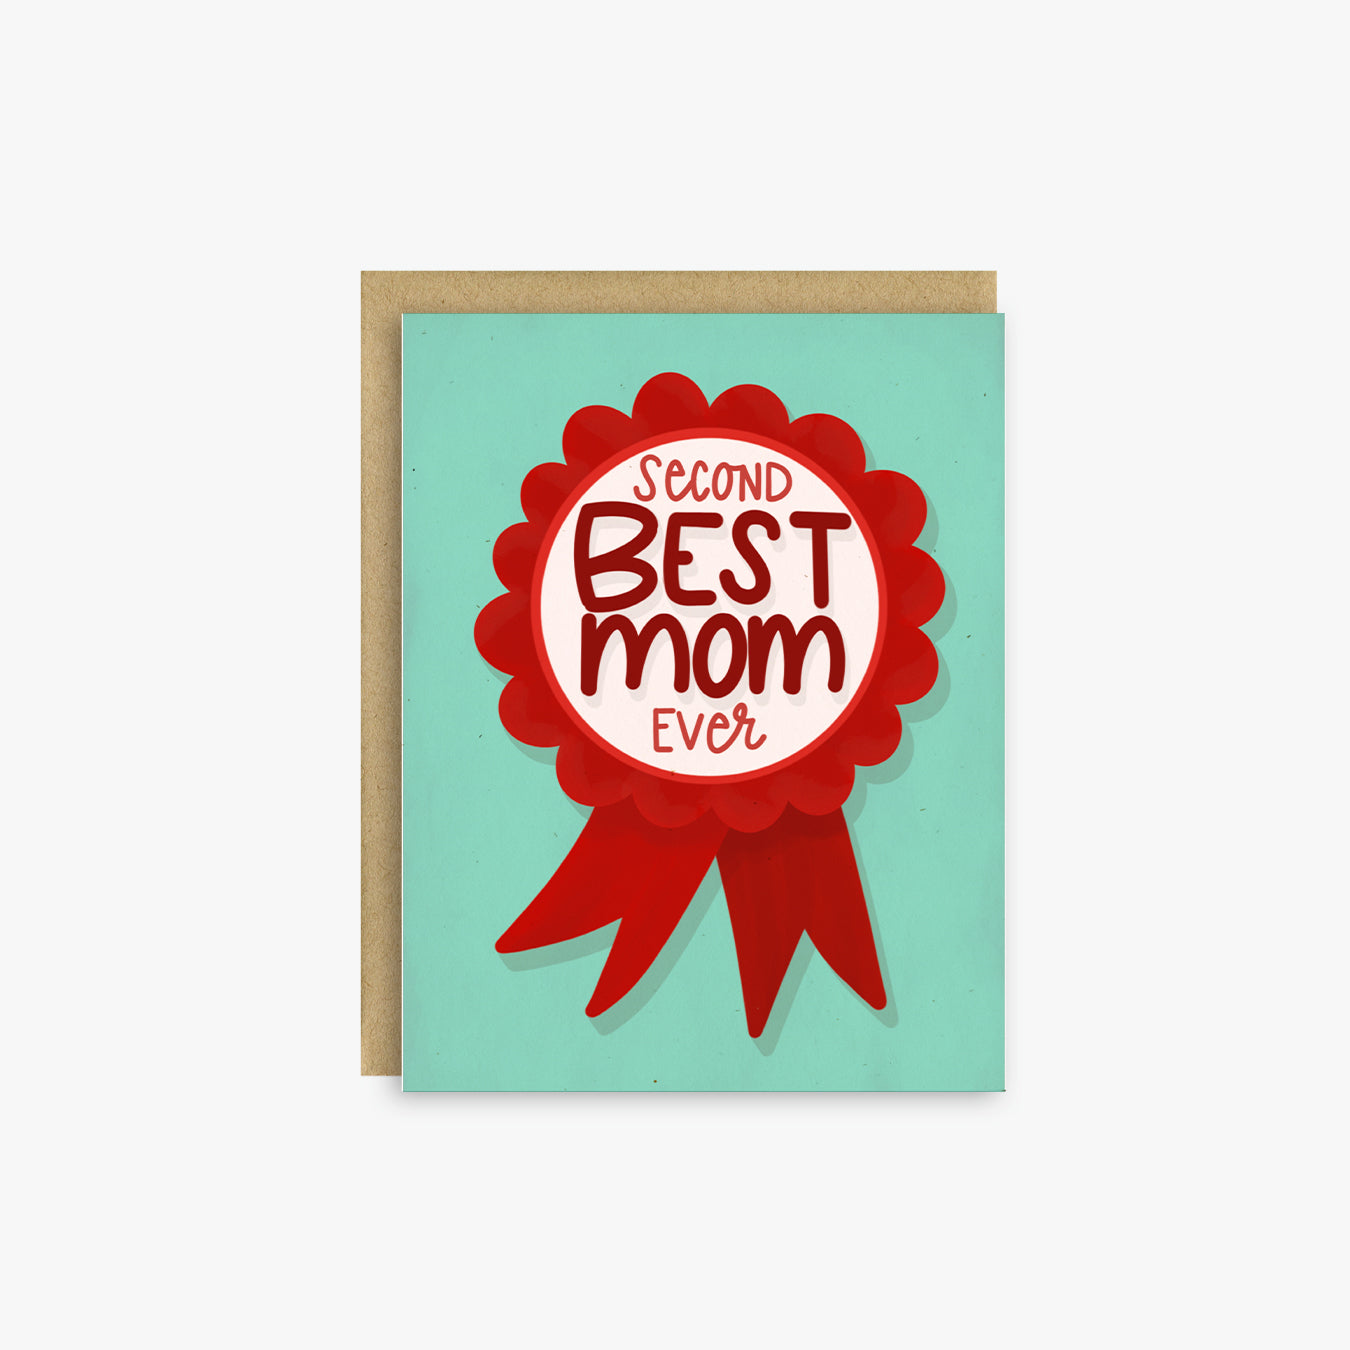 Second Best Mom Mother's Day Card, Funny Card for Mom